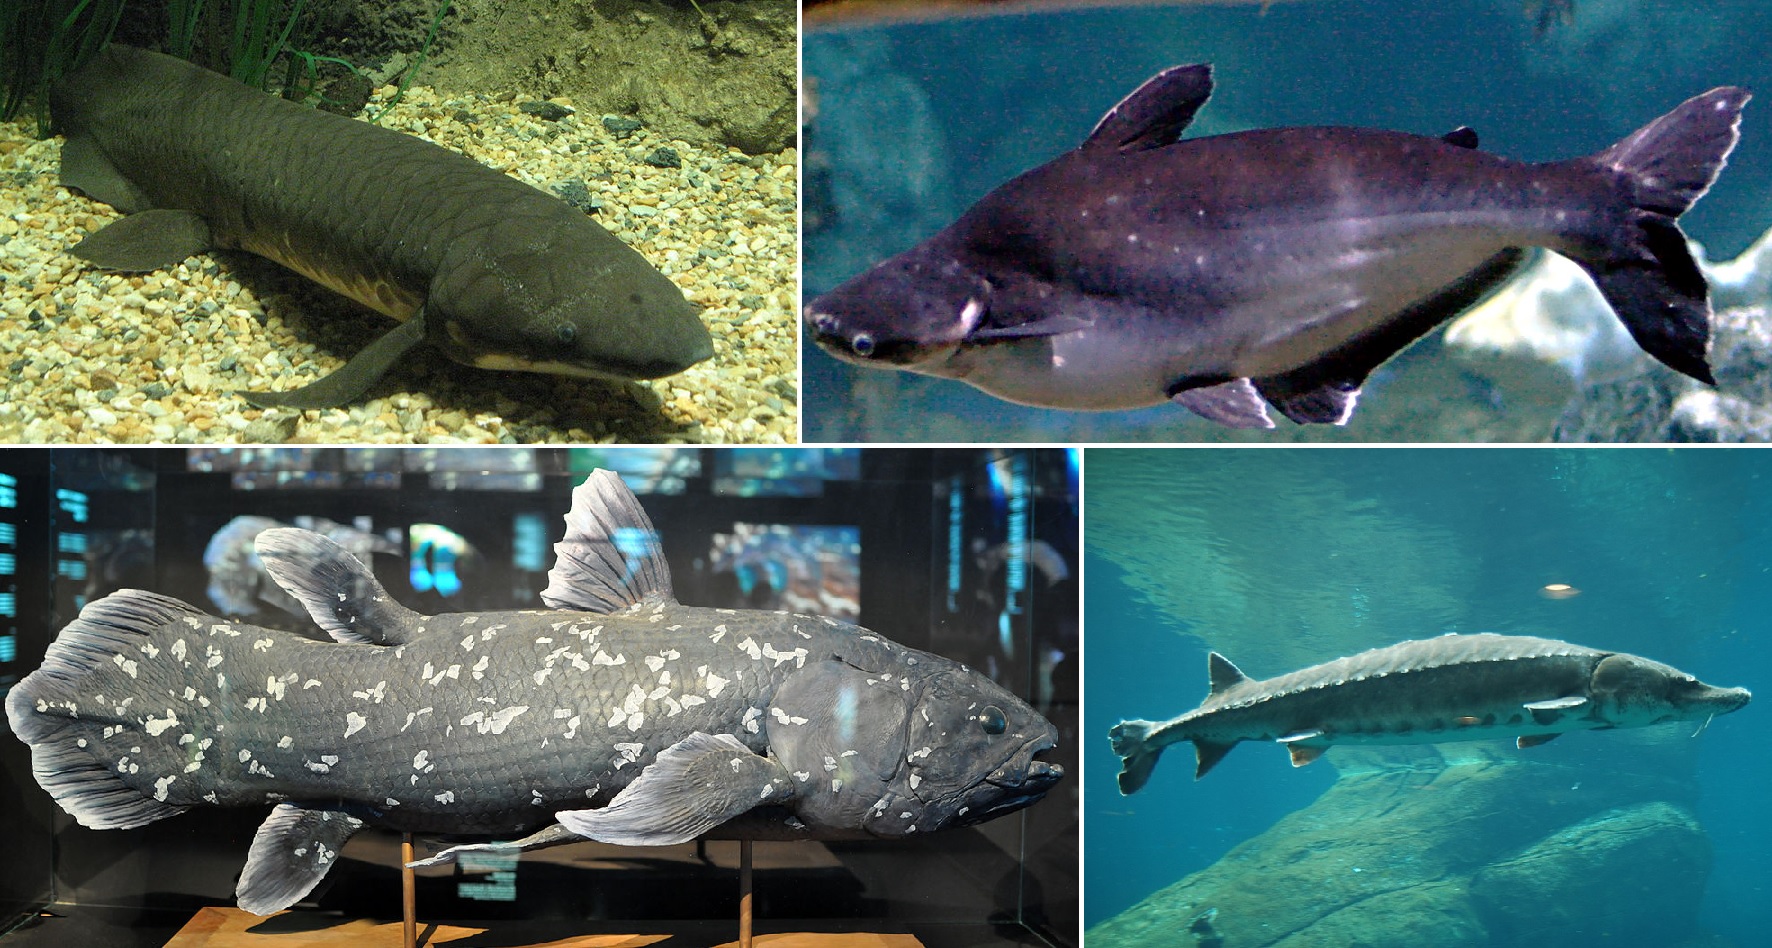 Example of Osteichthyes: Queensland lungfish and West Indian Ocean coelacanth (two Sarcopterygii), Iridescent shark and American black sturgeon (two Actinopterygii).